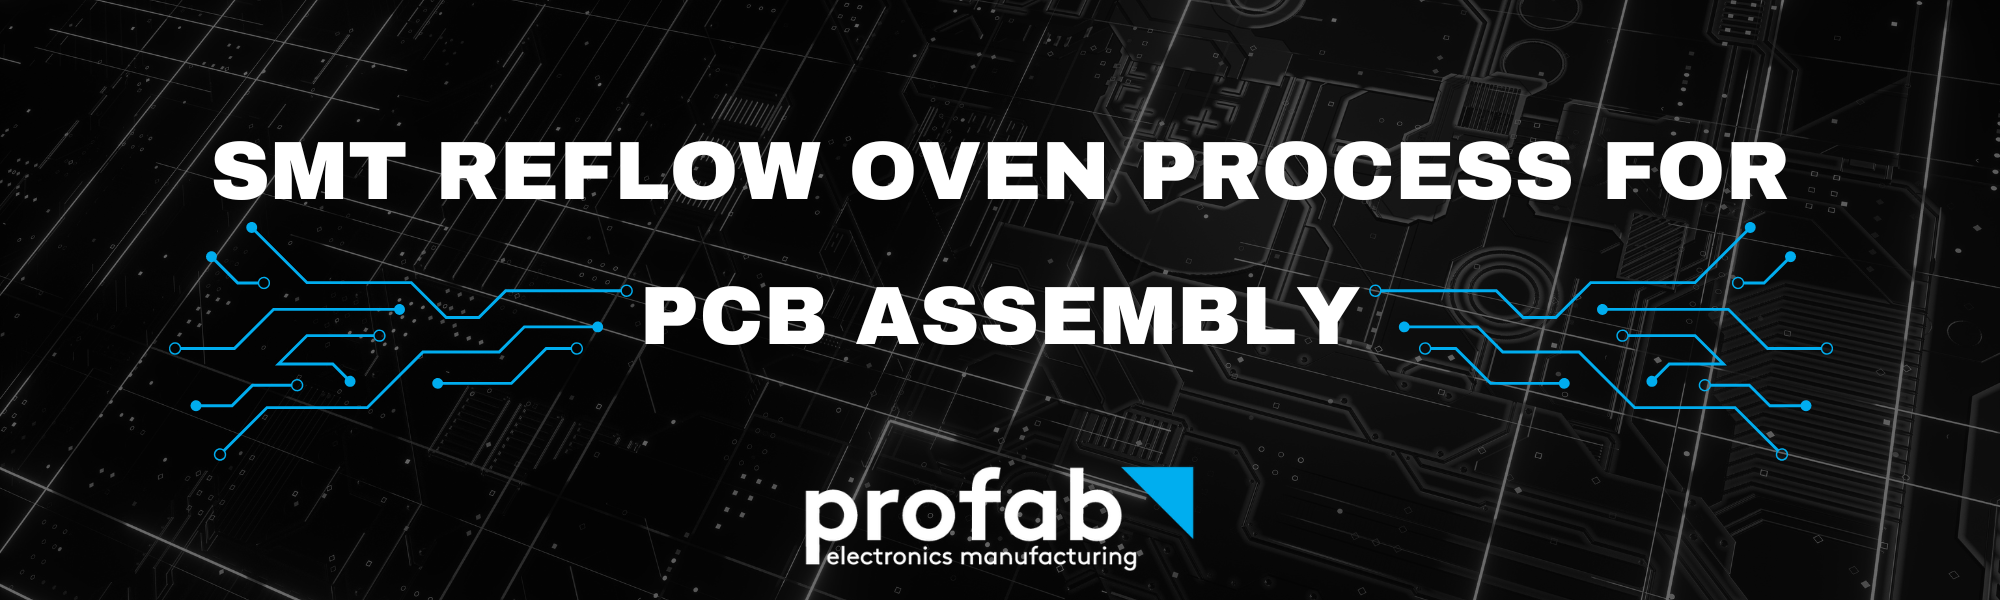 Surface Mount PCB Assembly Reflow Ovens